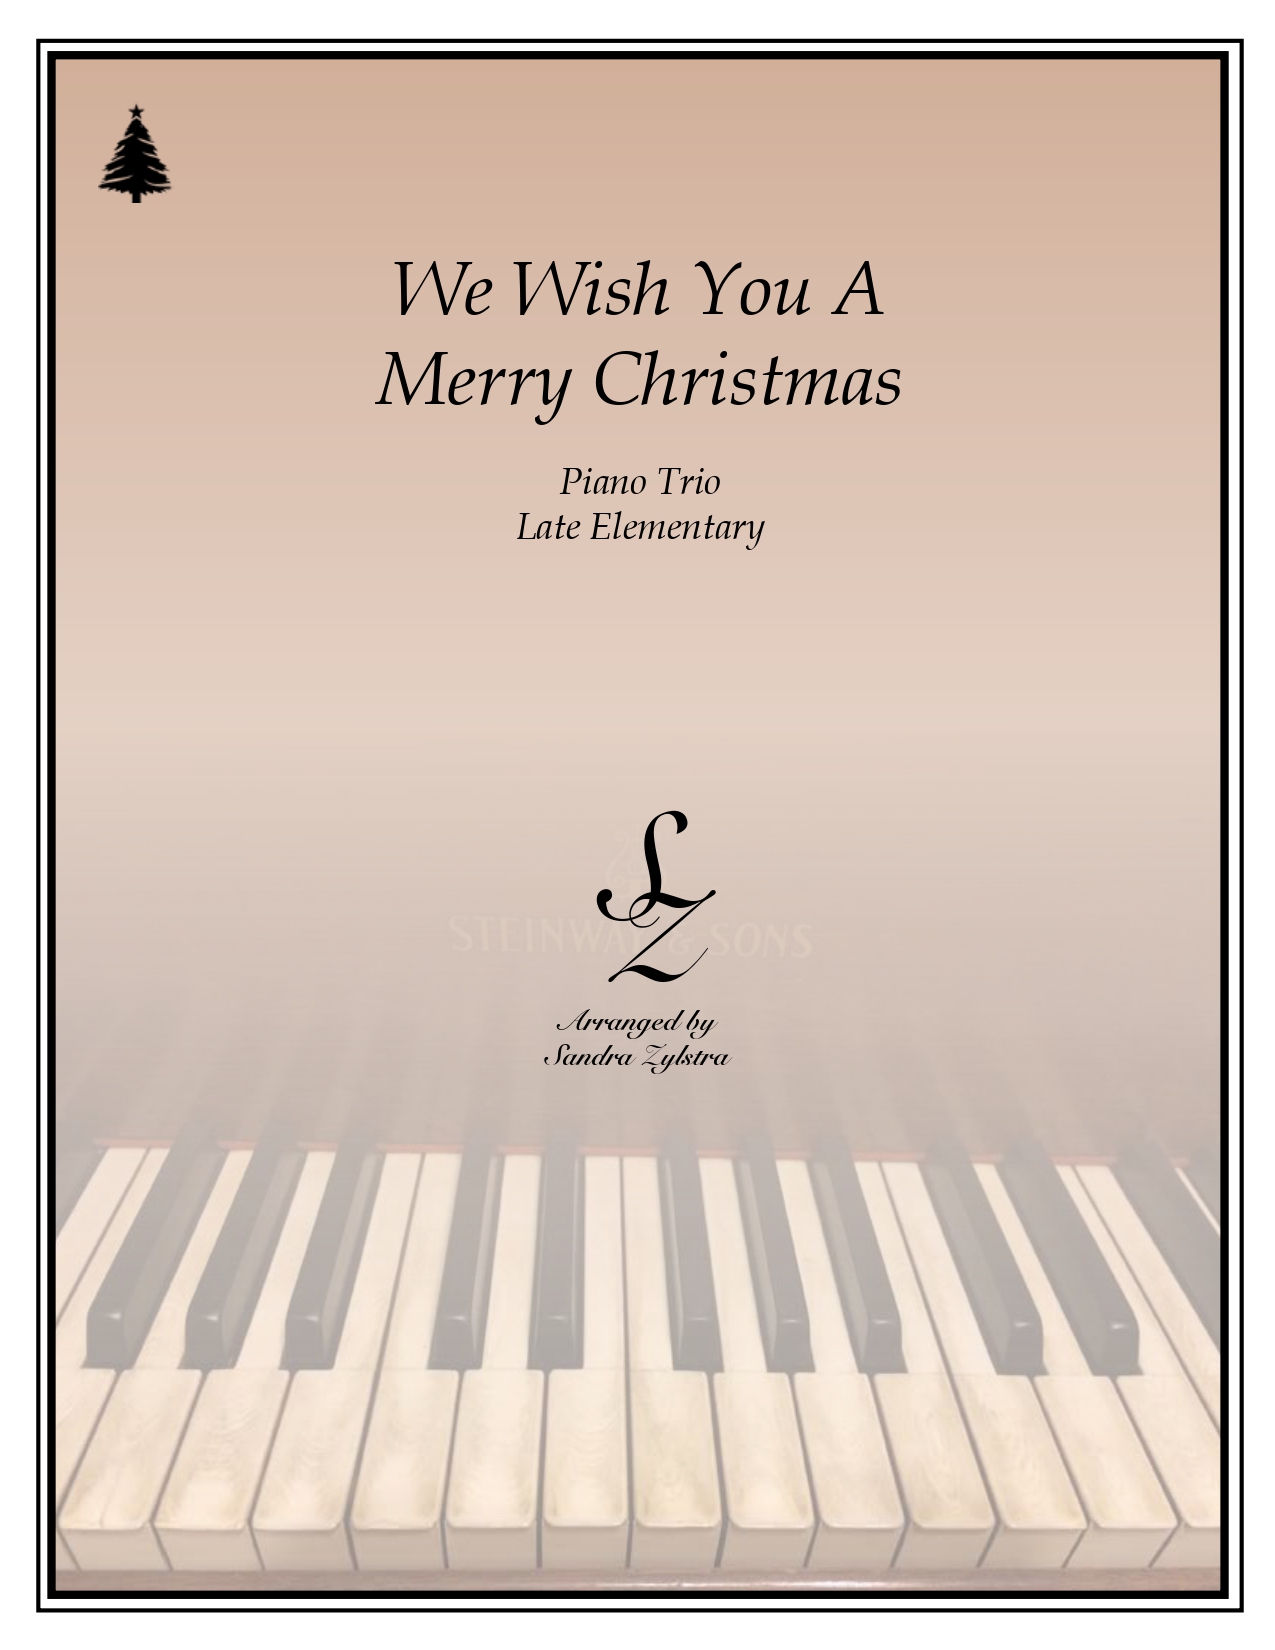 We Wish You A Merry Christmas piano trio stacked separate cover page 00011